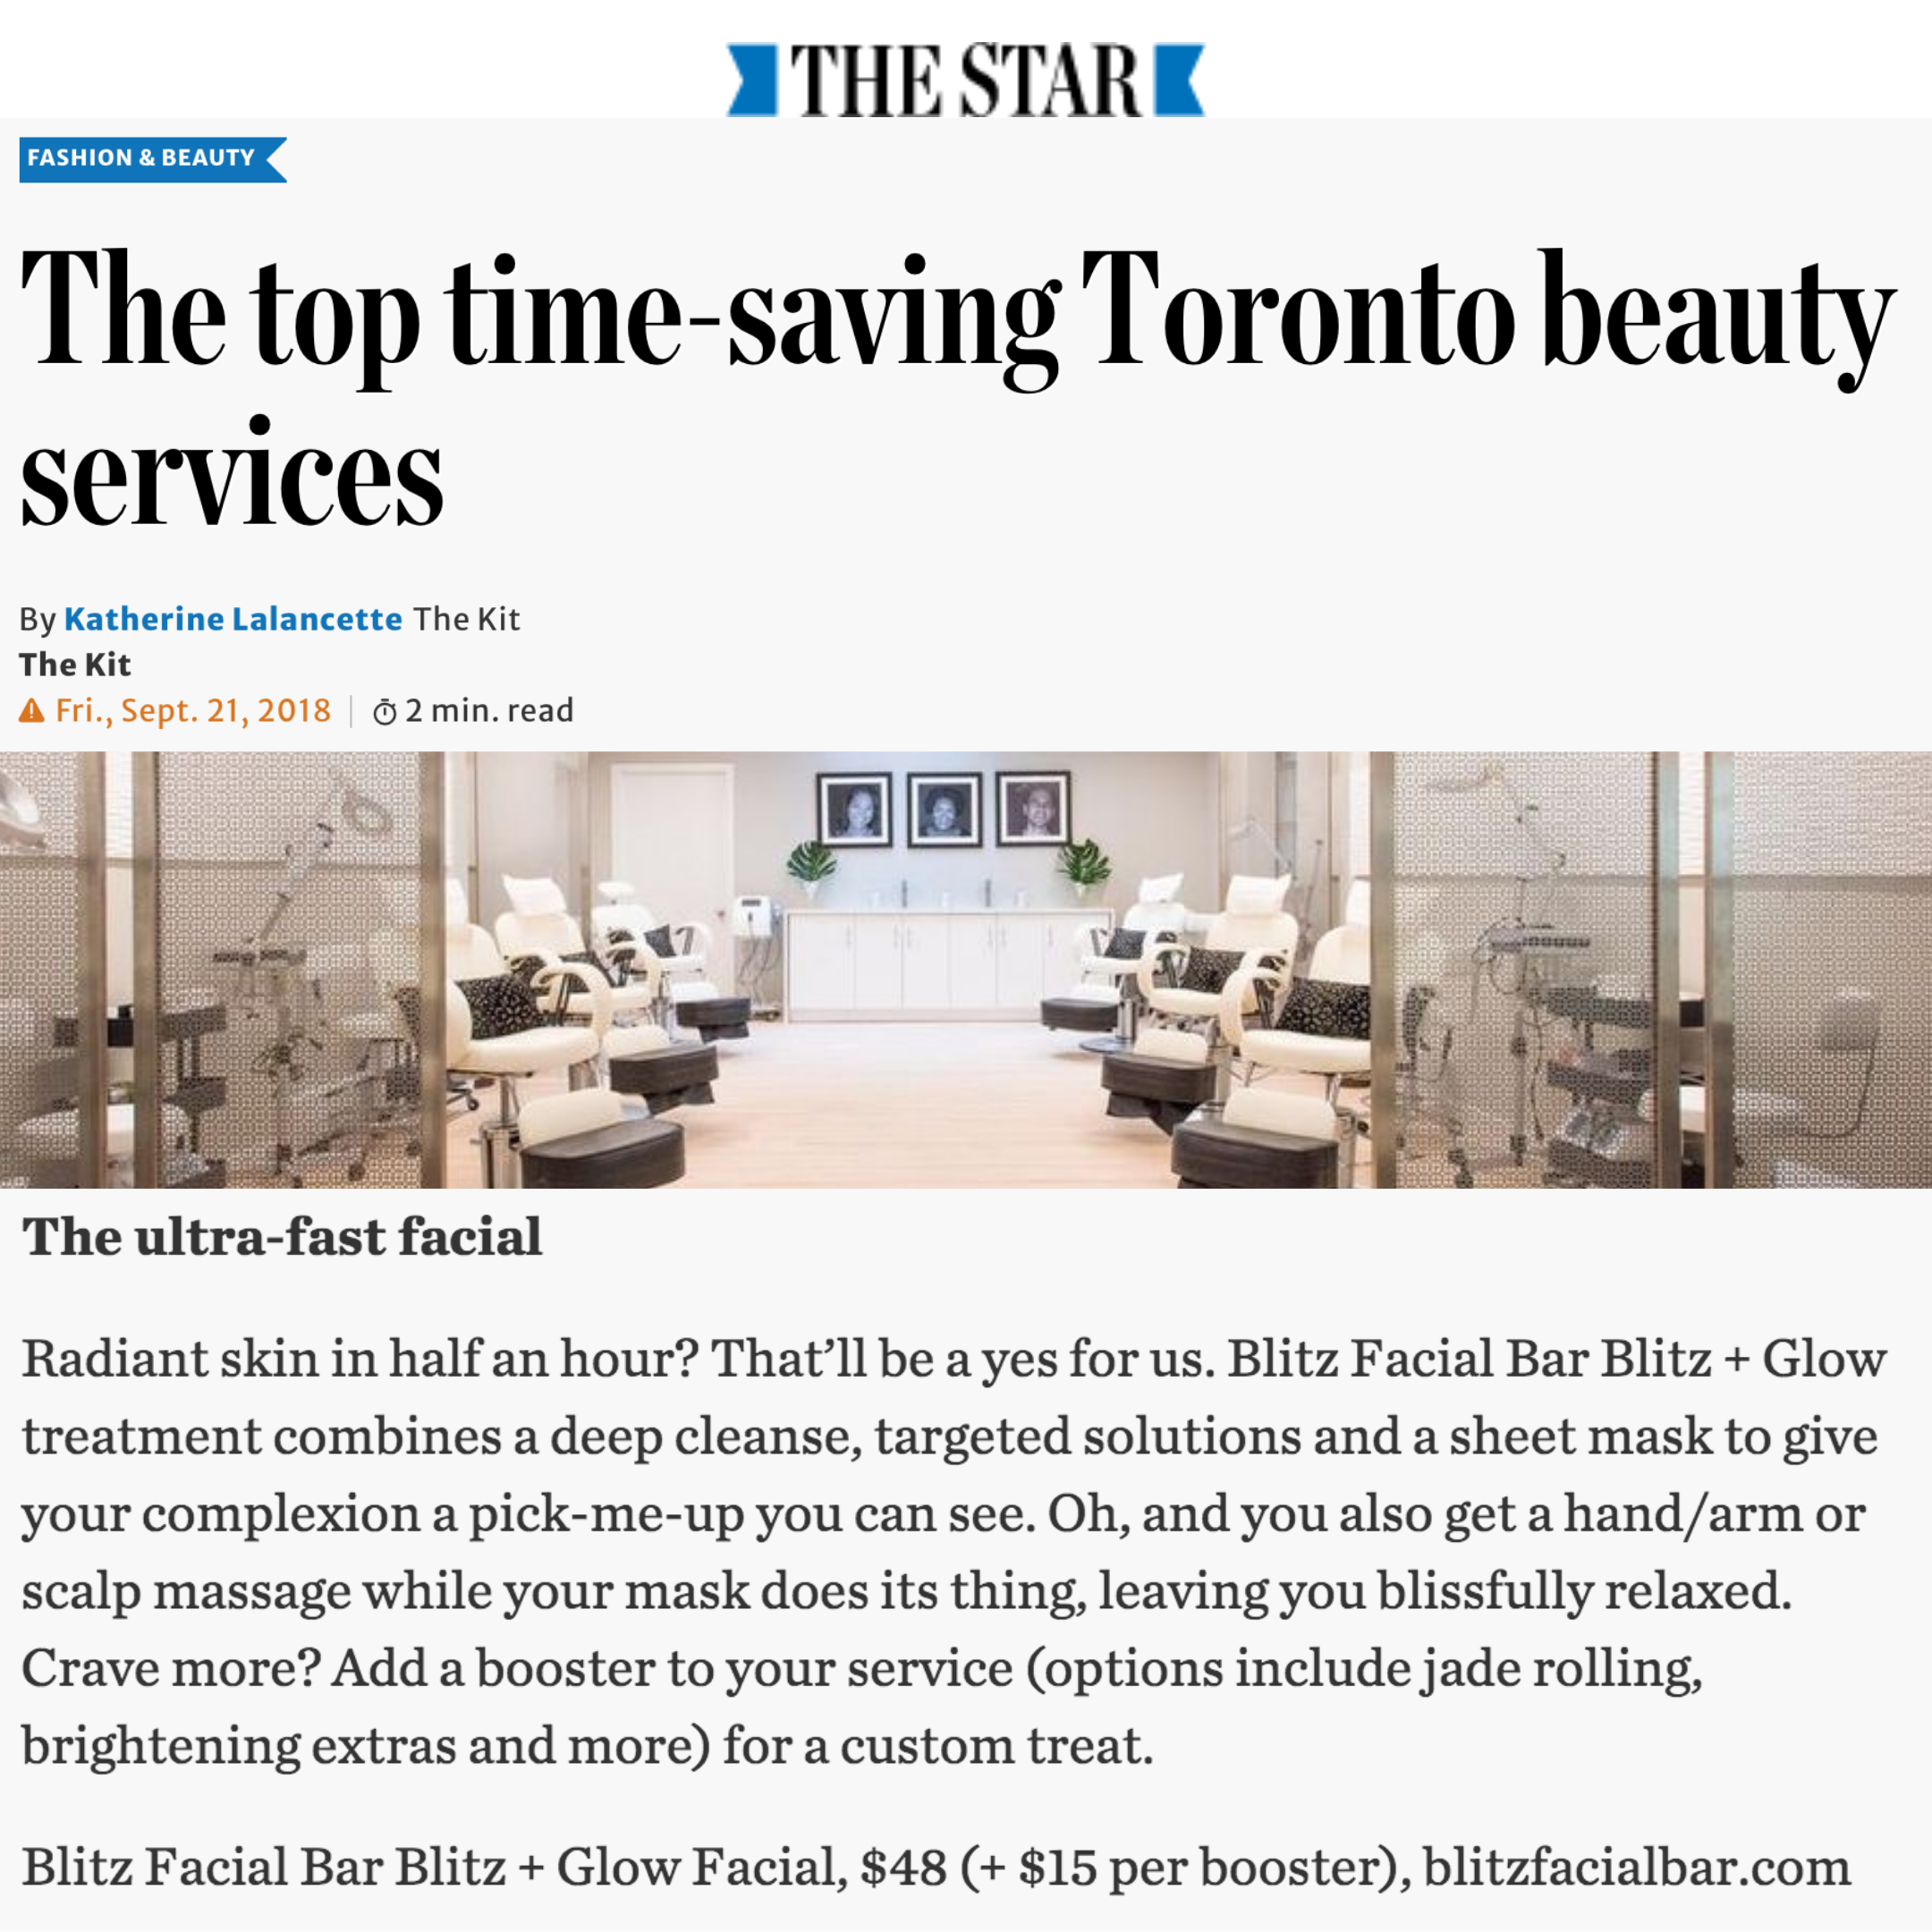 As mentioned in The Star, "Blitz Facial Bar Blitz + Glow treatment combines a deep cleanse, targeted solutions and a sheet mask to give your complexion a pick-me-up you can see."